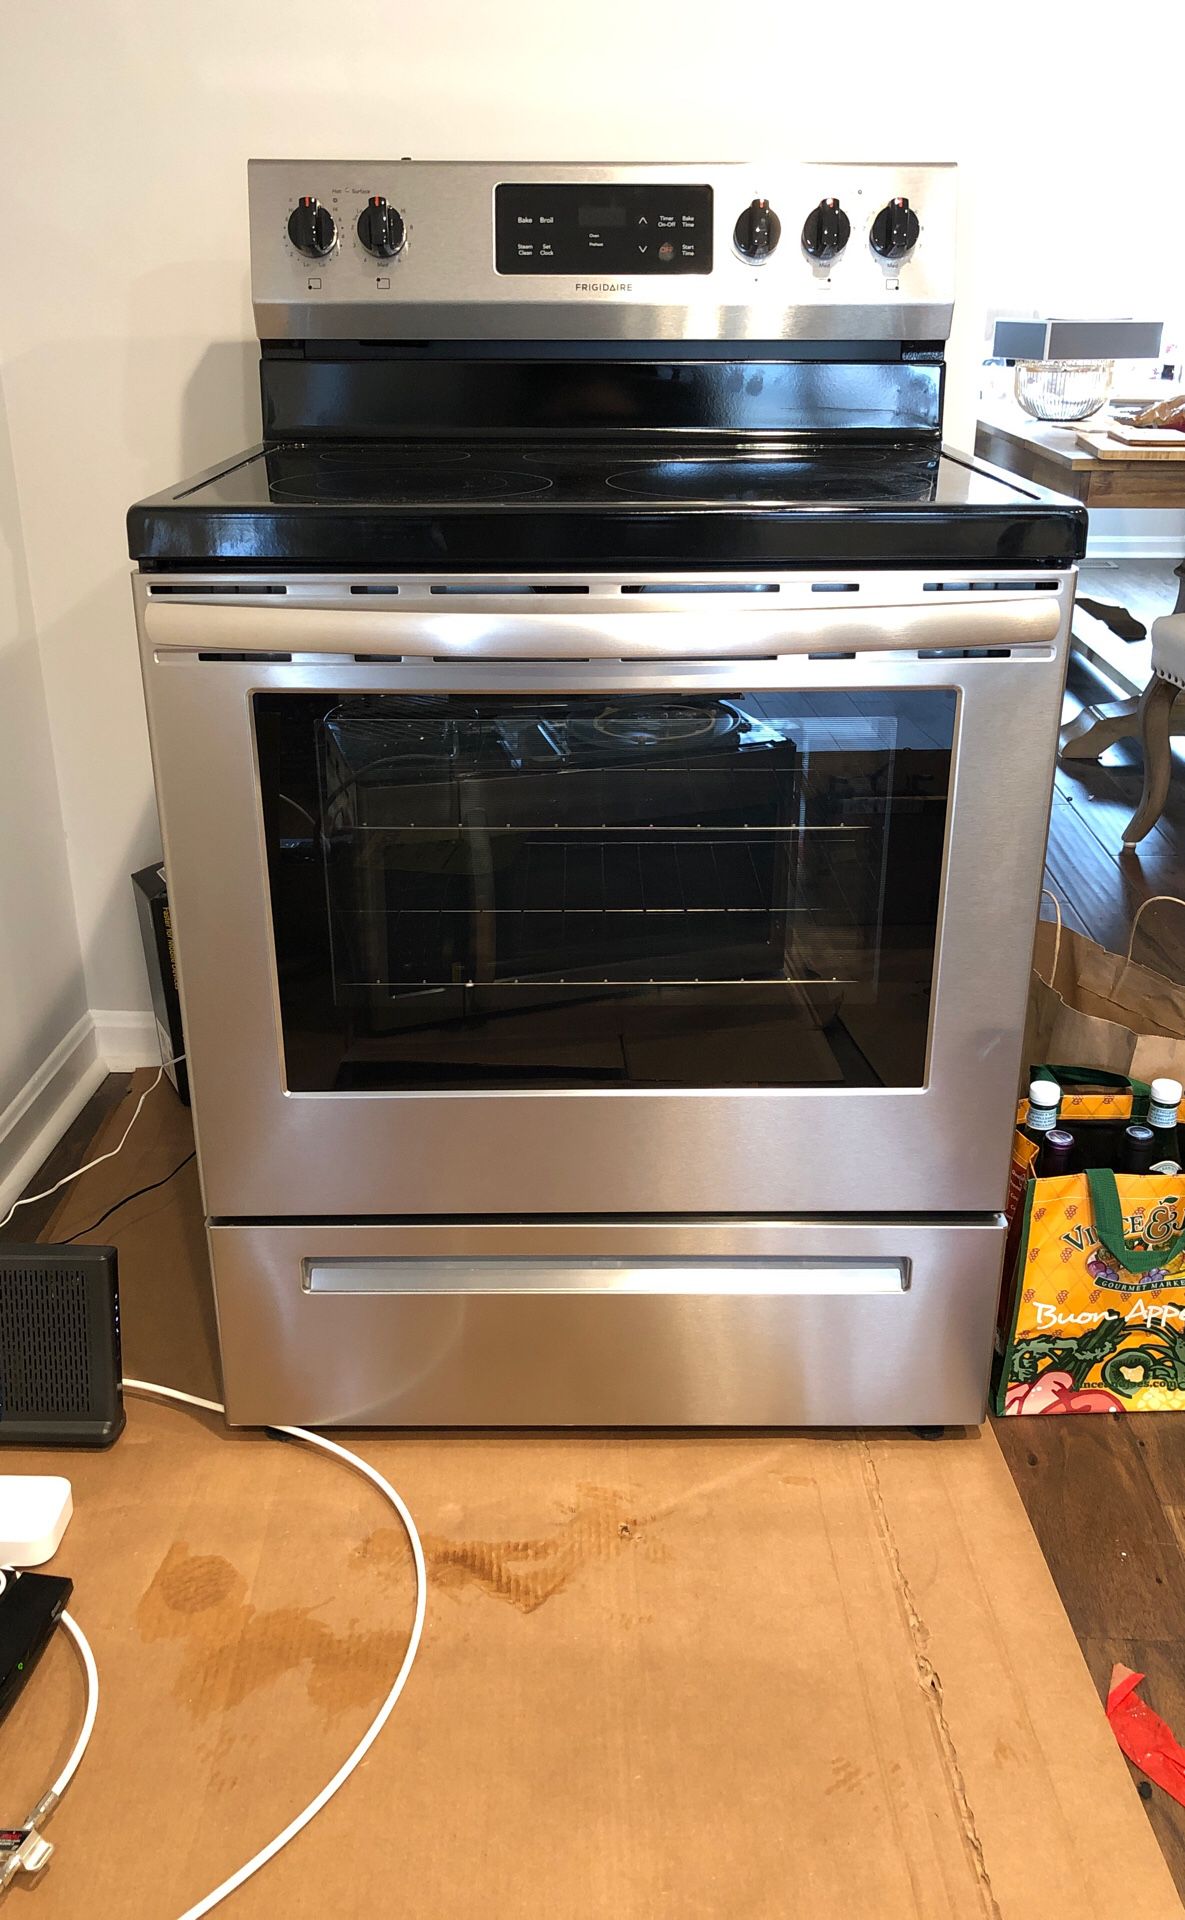 Brand New FrigidaireElectric Range and Oven Stainless Steel (Have Proof of Purchase for Warranty)